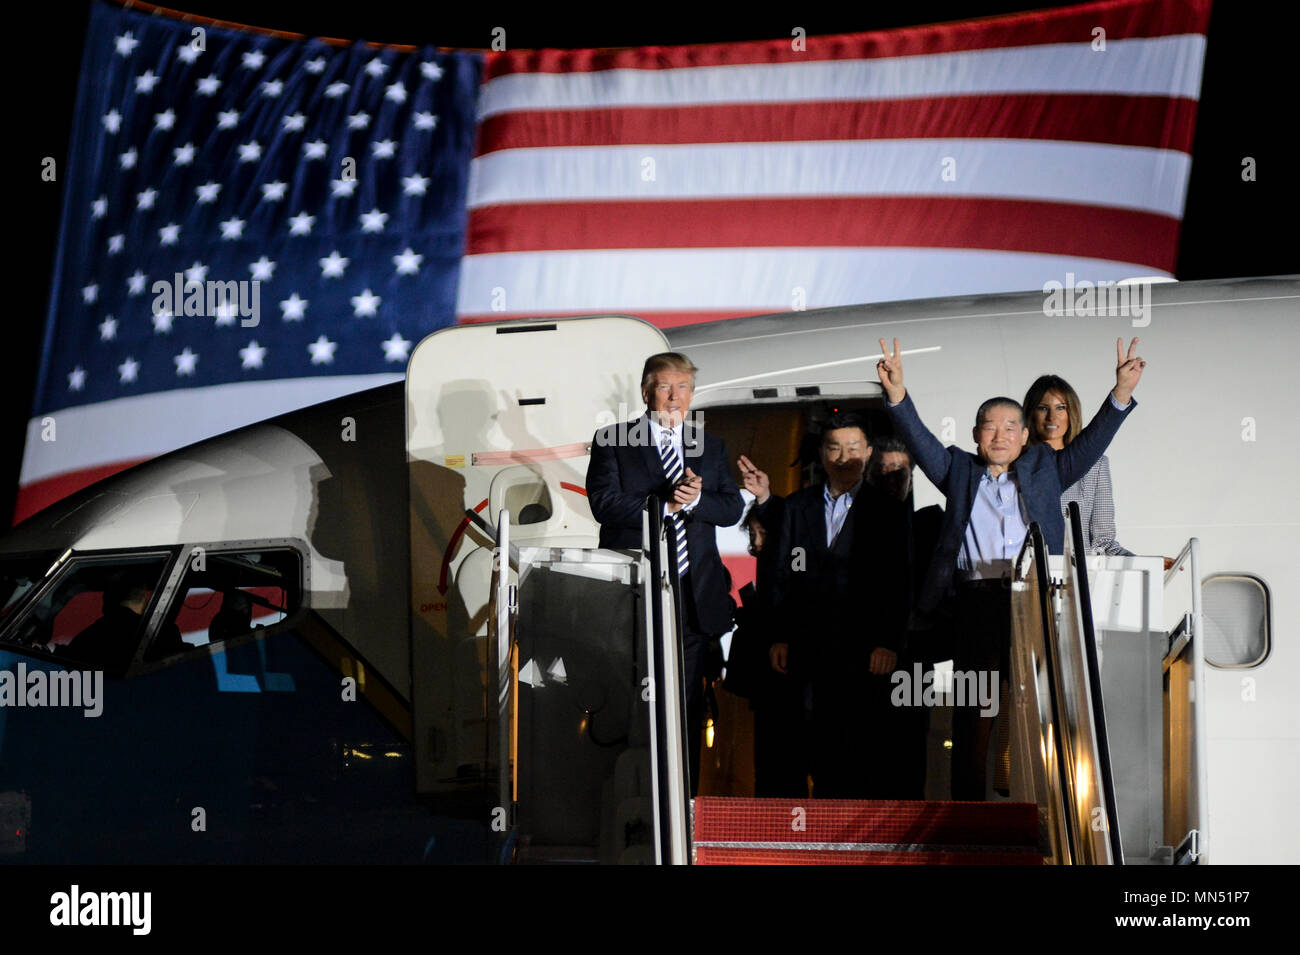 Three Americans who were freed from North Korean prison, May 9, 2018 are welcomed home by President of the United States Donald J. Trump and First Lady Melania Trump as they arrive at Joint base Andrews, Md. on May 10, 2018. An 89th Airlift Wing C-40 high-priority personnel transport aircraft carried Kim Dong-chul, Tony Kim and Kim Hak-song from North Korea to Anchorage, Alaska where the plane refueled before arriving at JBA around 3 a.m. EST. The men were accompanied by Secretary of State Mike Pompeo who made the flight back with them. The 89th AW executes special missions such as these on a  Stock Photo